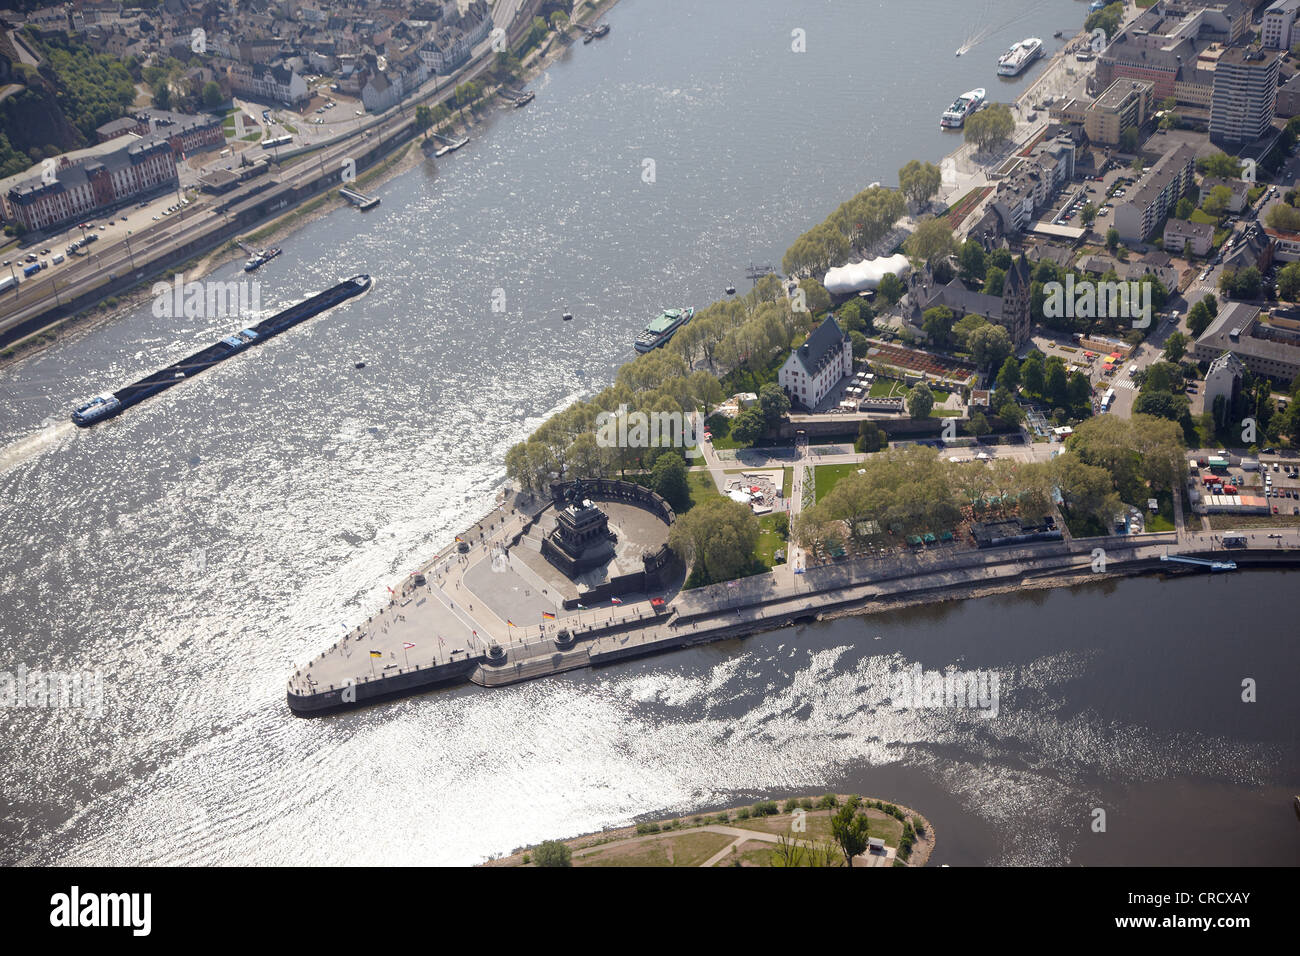 Aerial view, Deutsches Eck headland, confluence of the Rhine and Moselle rivers, Koblenz, Rhineland-Palatinate, Germany, Europe Stock Photo